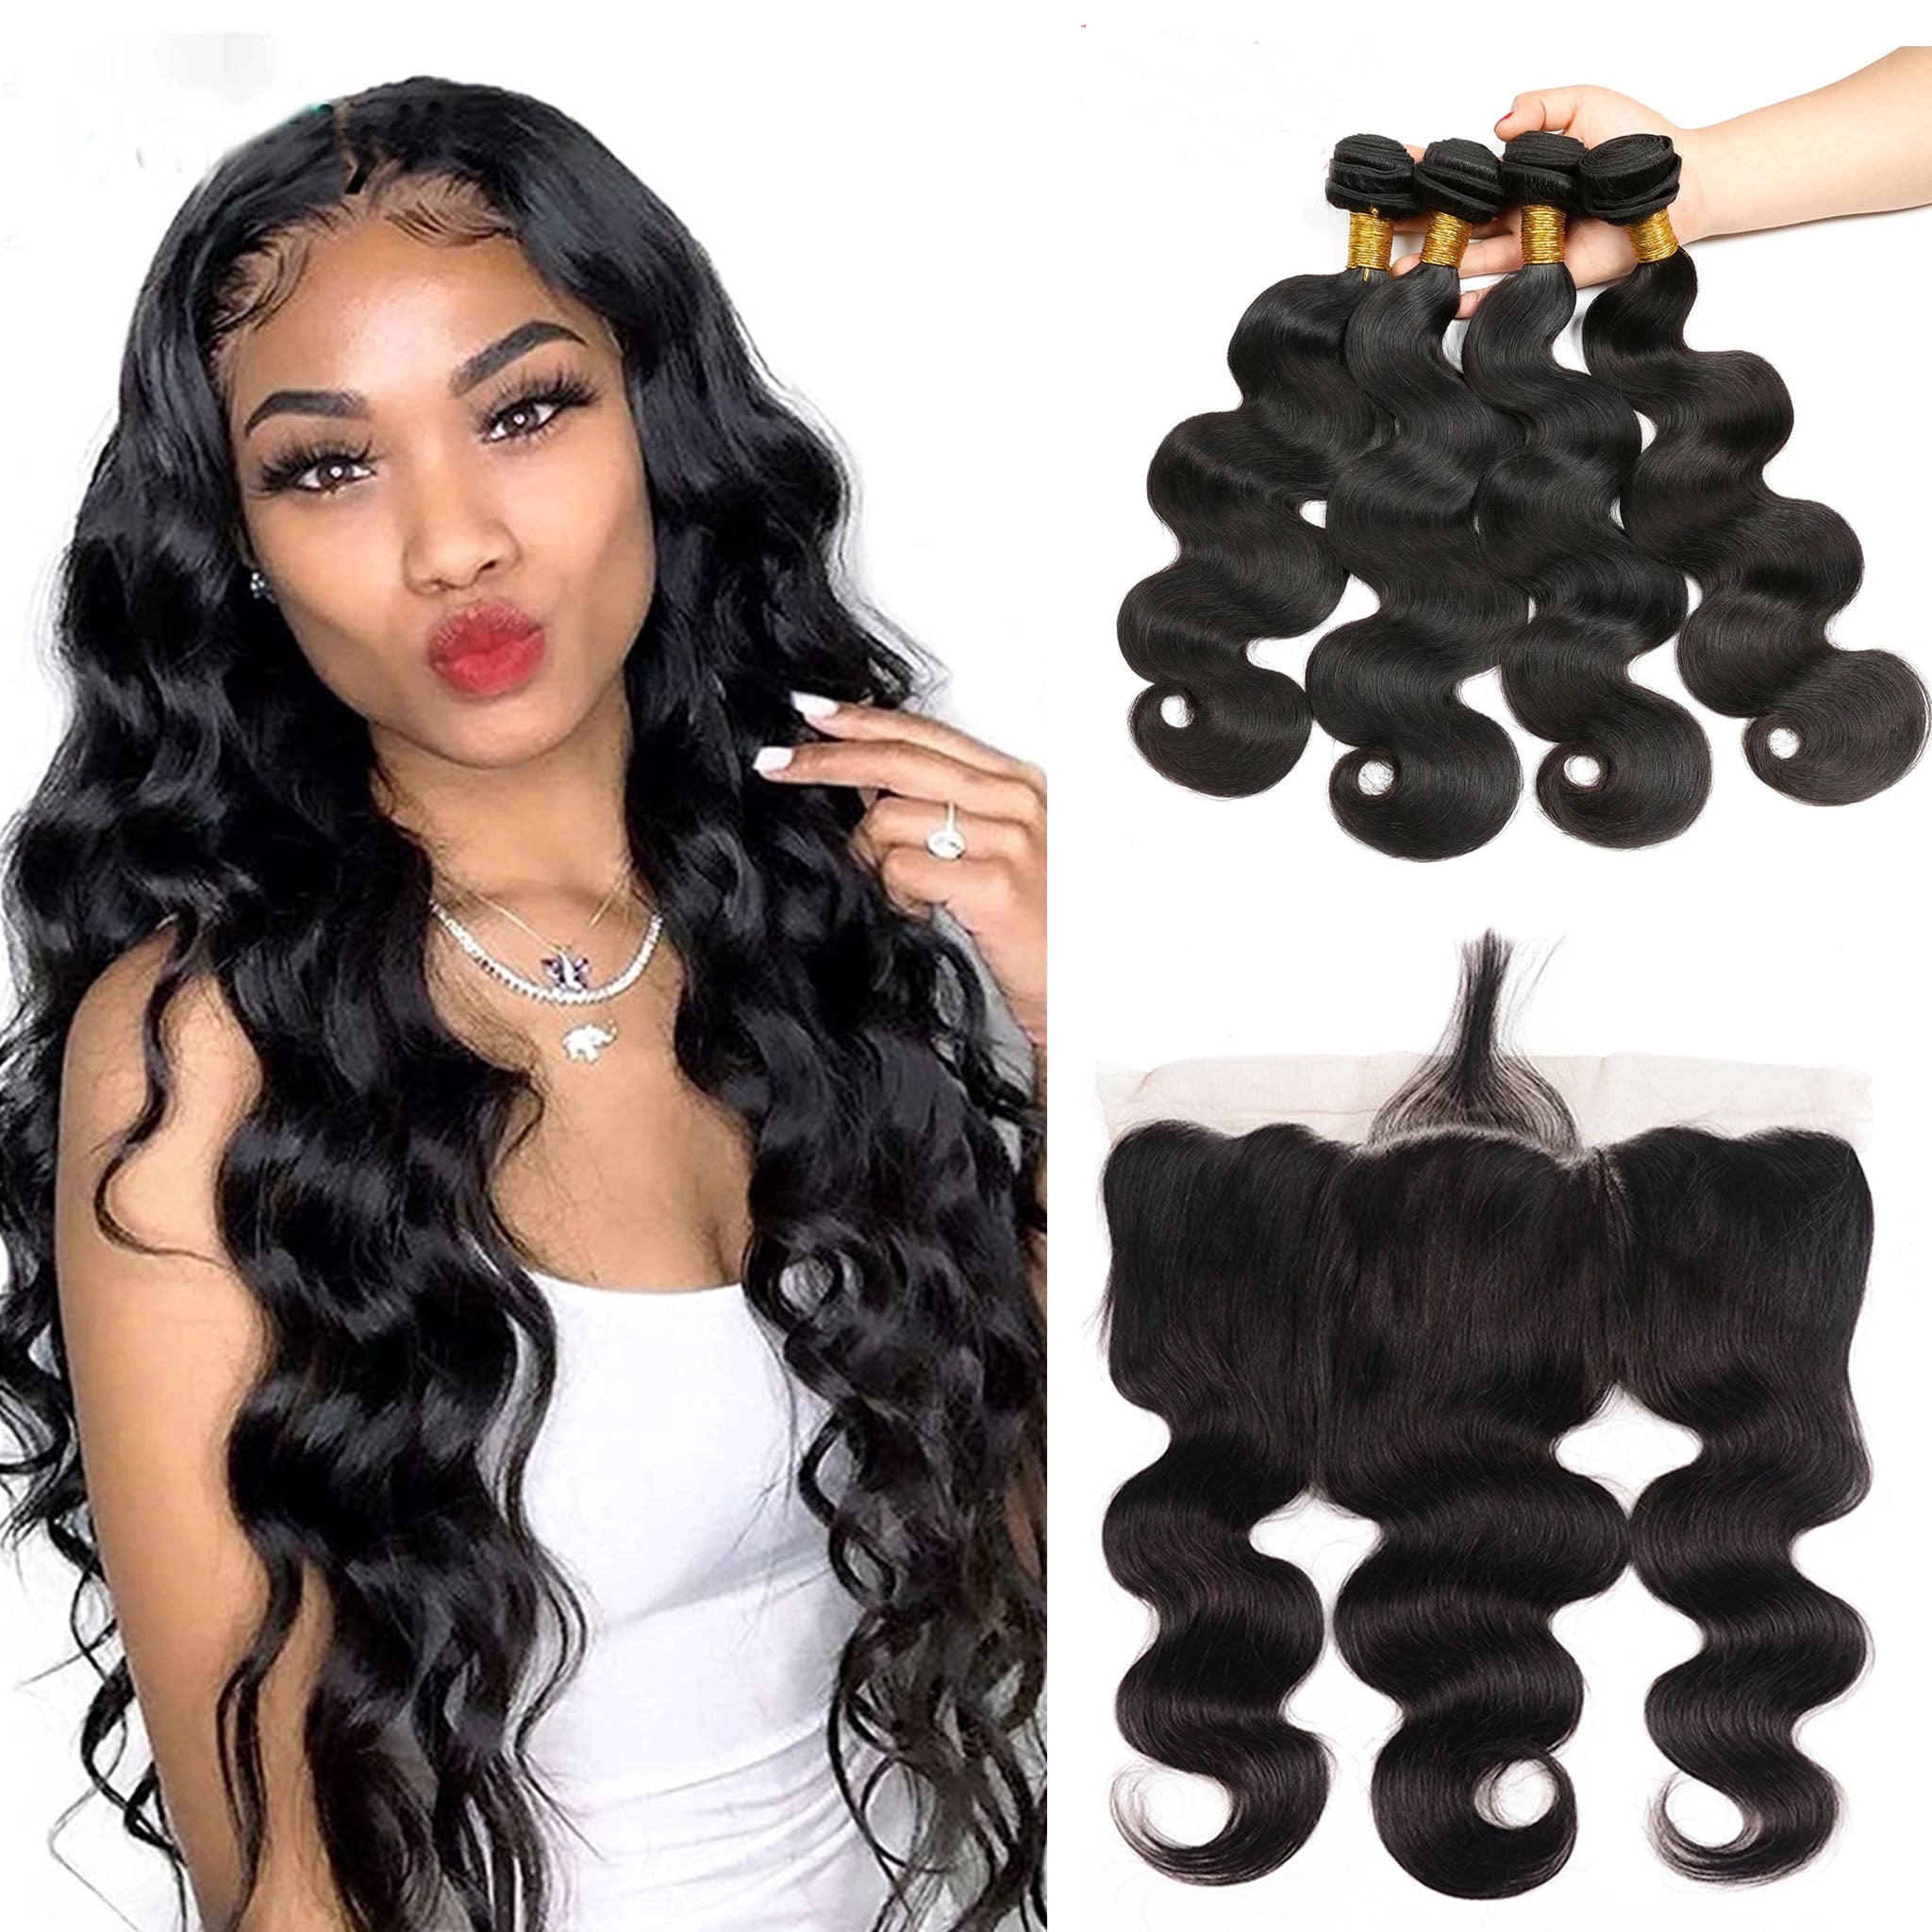 Abbily 4 Bundles Body Wave With 13x4 Lace Frontal Abbily Human Hair